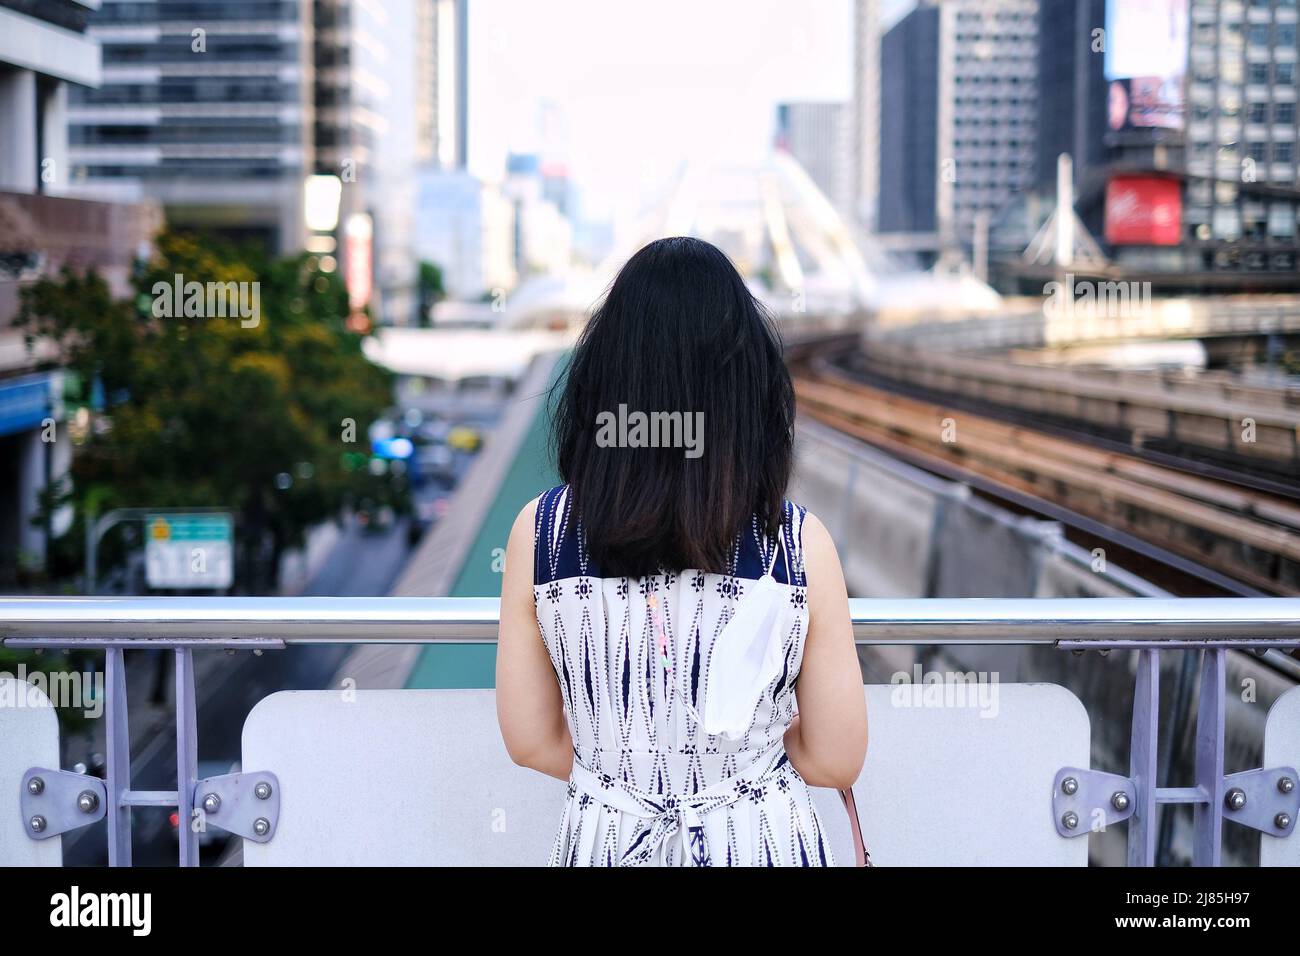 The back view of a woman in white and blue dress is standing on a walkway at a sky train station looking over the street and skyline of Bangkok Stock Photo